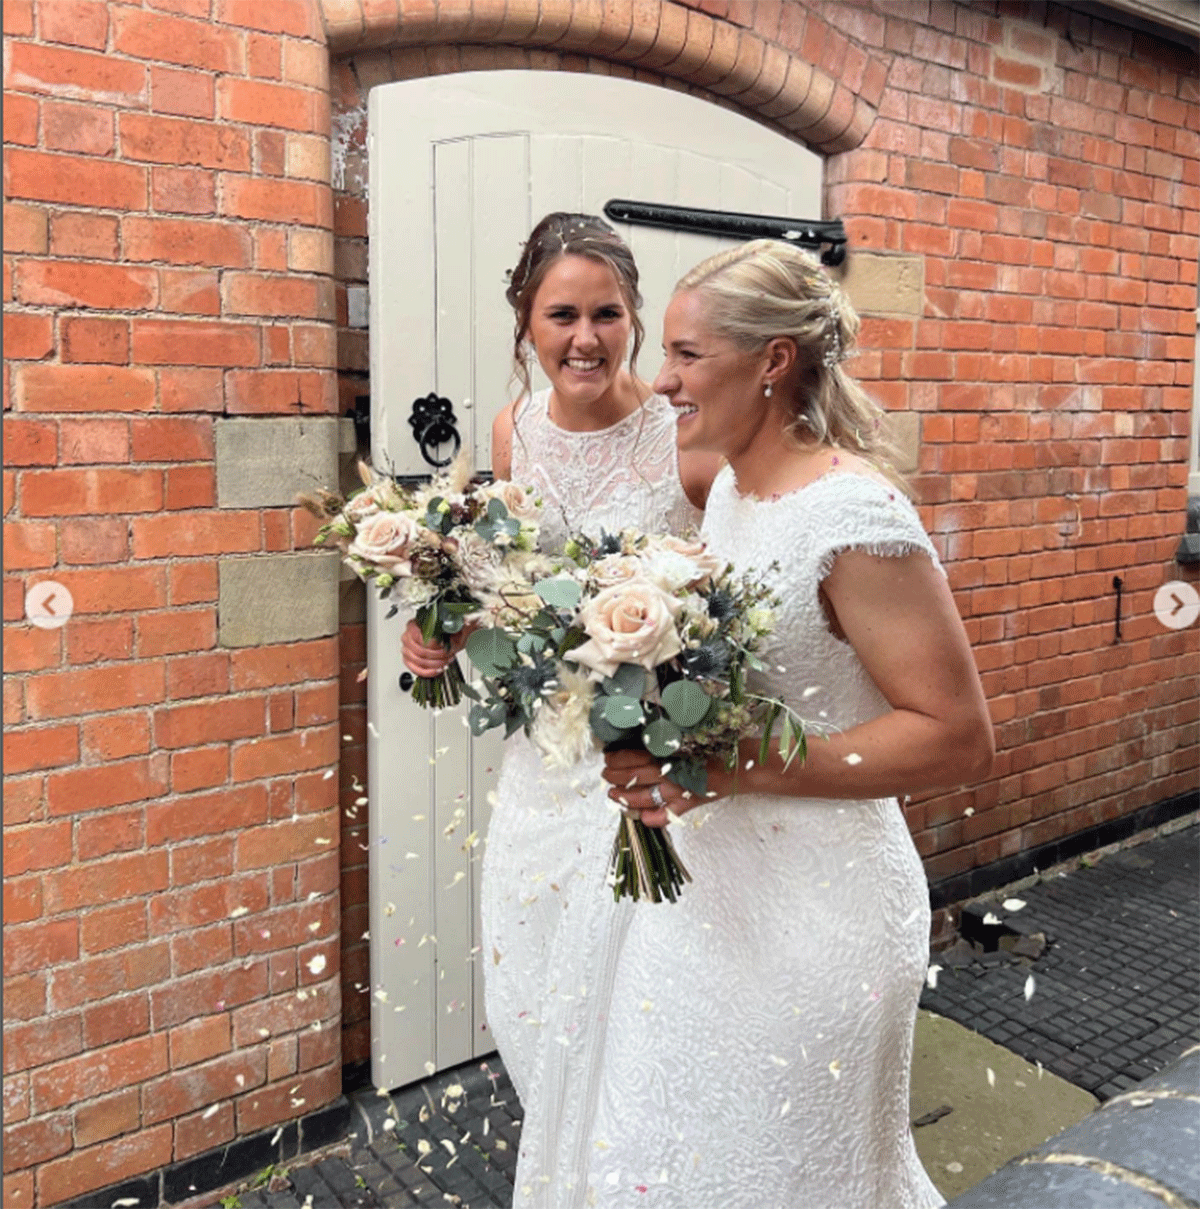 The newly-wedded England women cricketers, Natalie Sciver and Katherine Brunt are all smiles